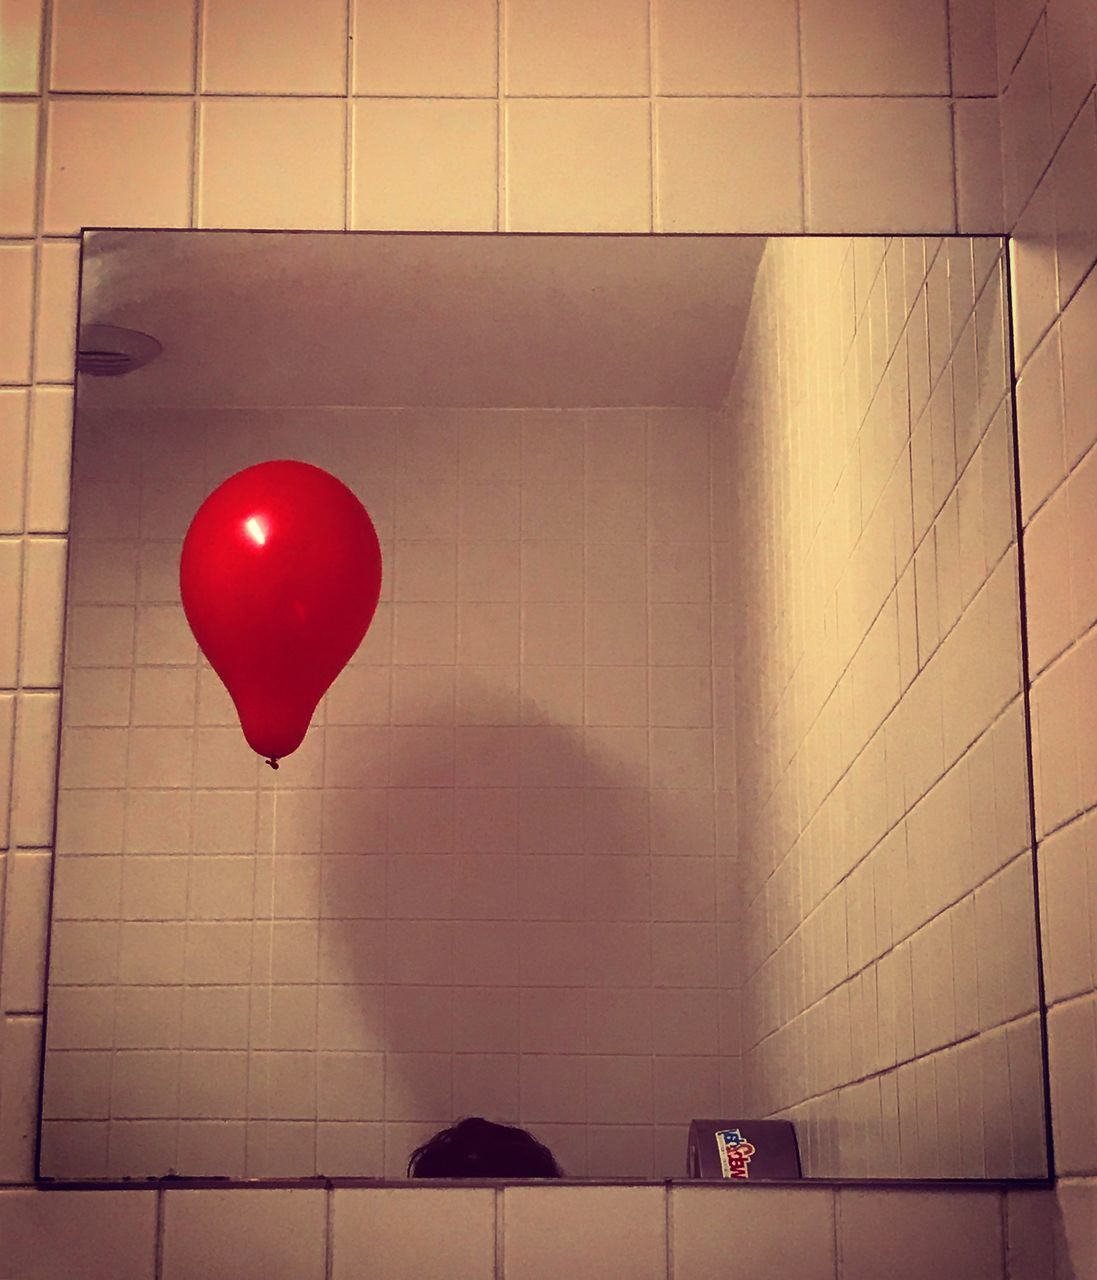 RED BALLOON ON TILED WALL